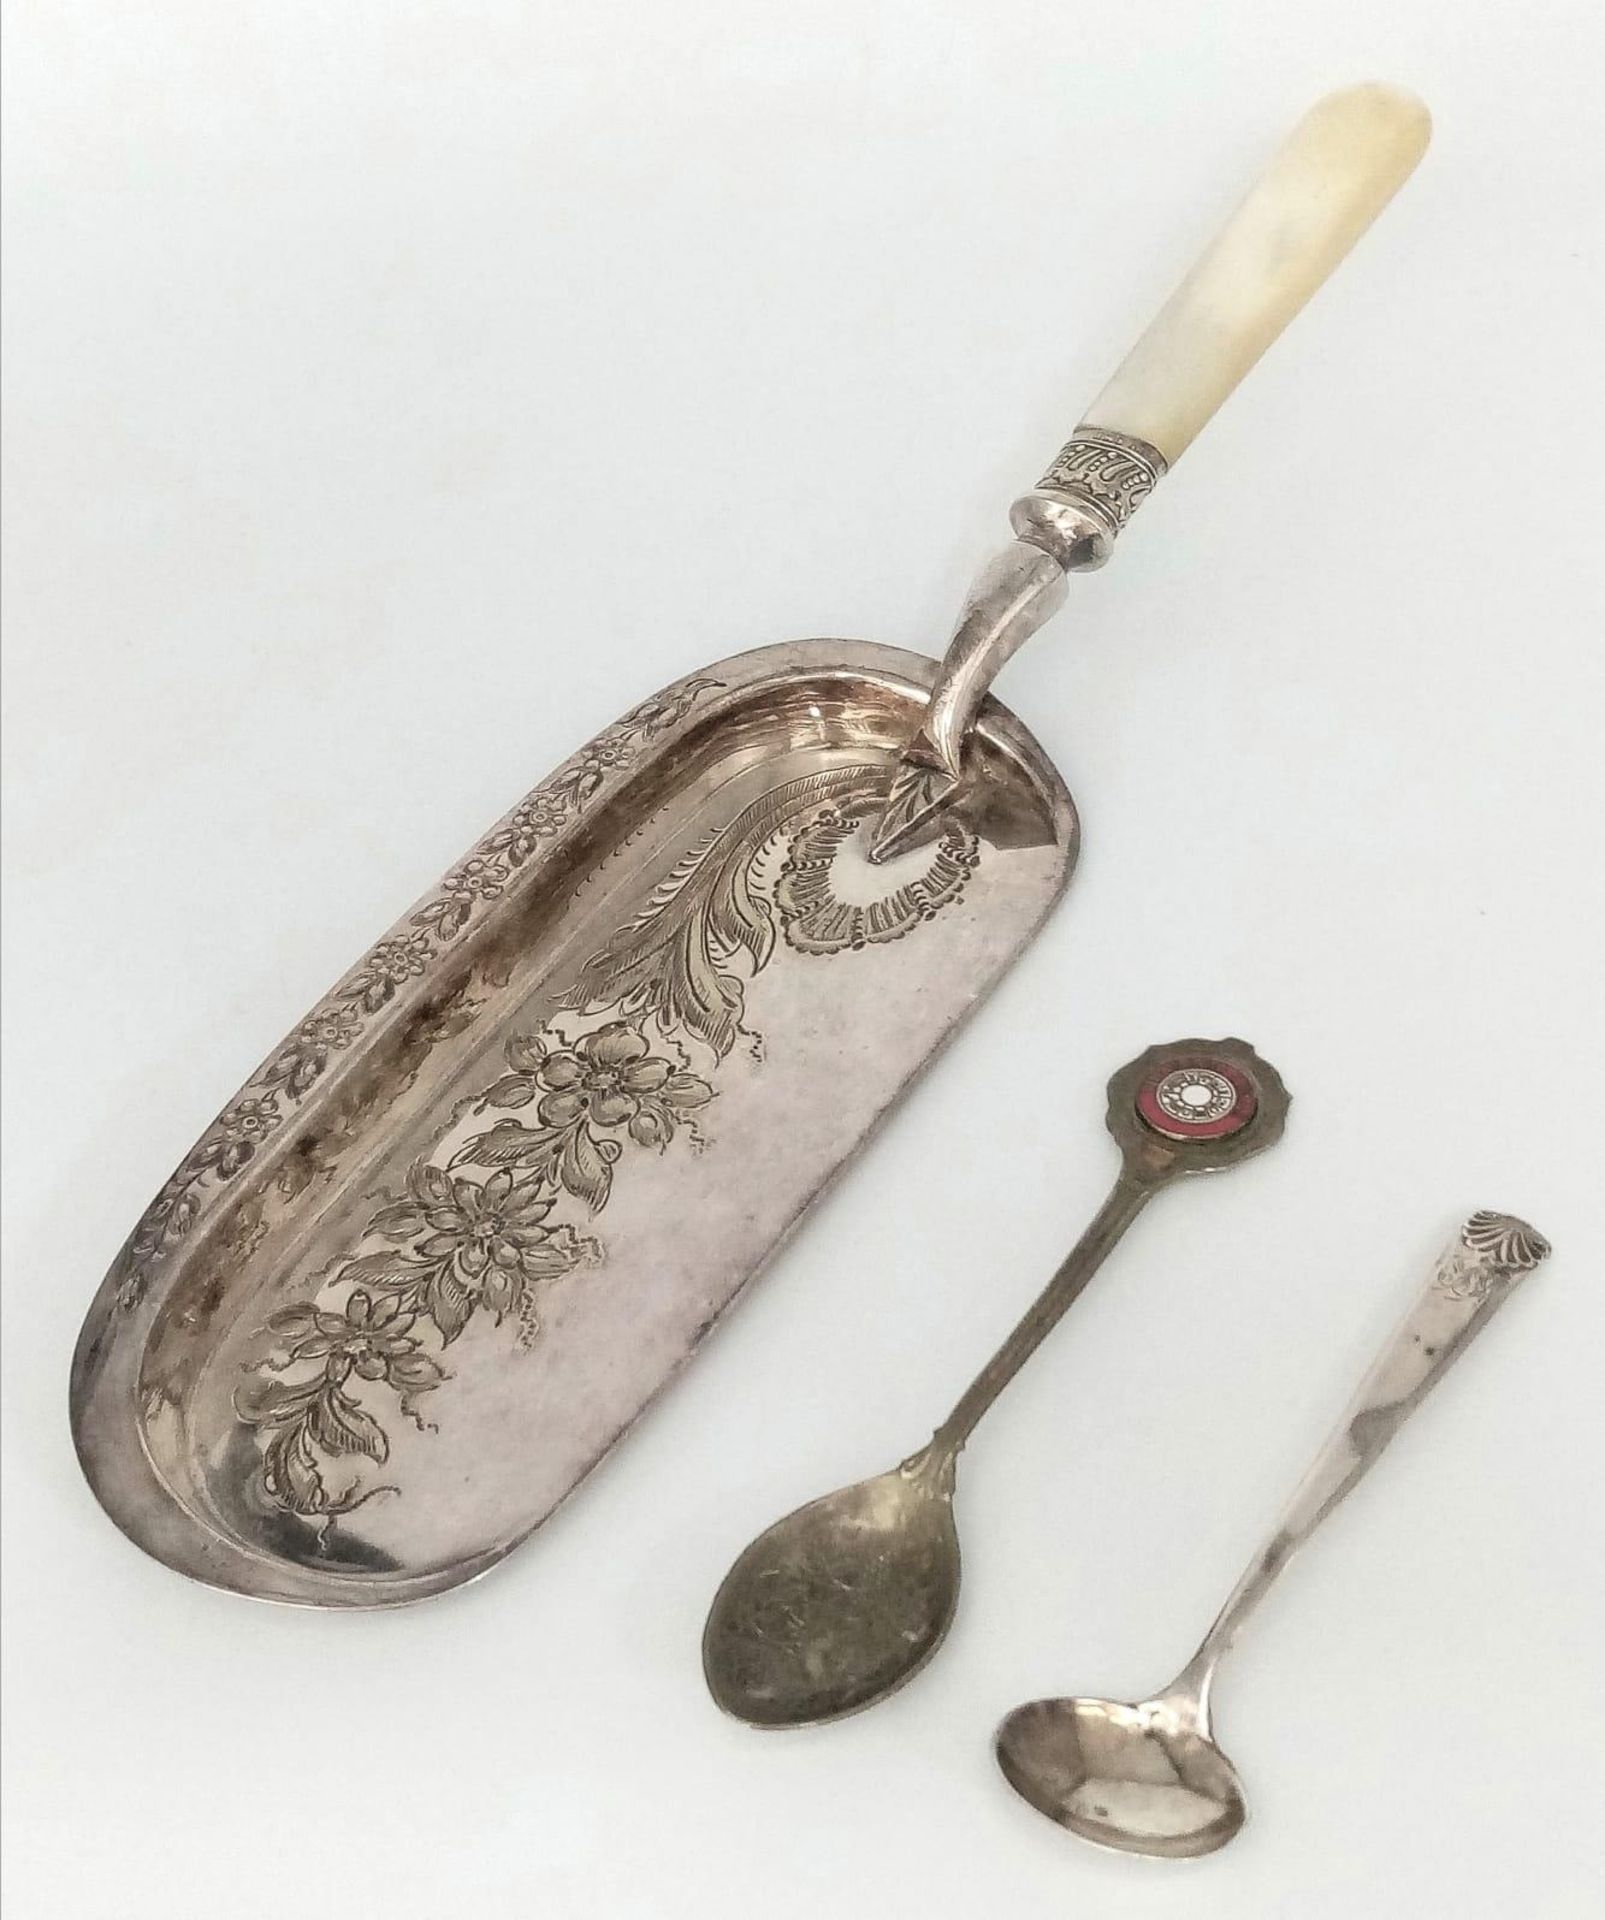 An Eclectic Mix - An Antique Silver Plated Bread Crumb Scoop with Mother of Pearl Handle - 32cm, A